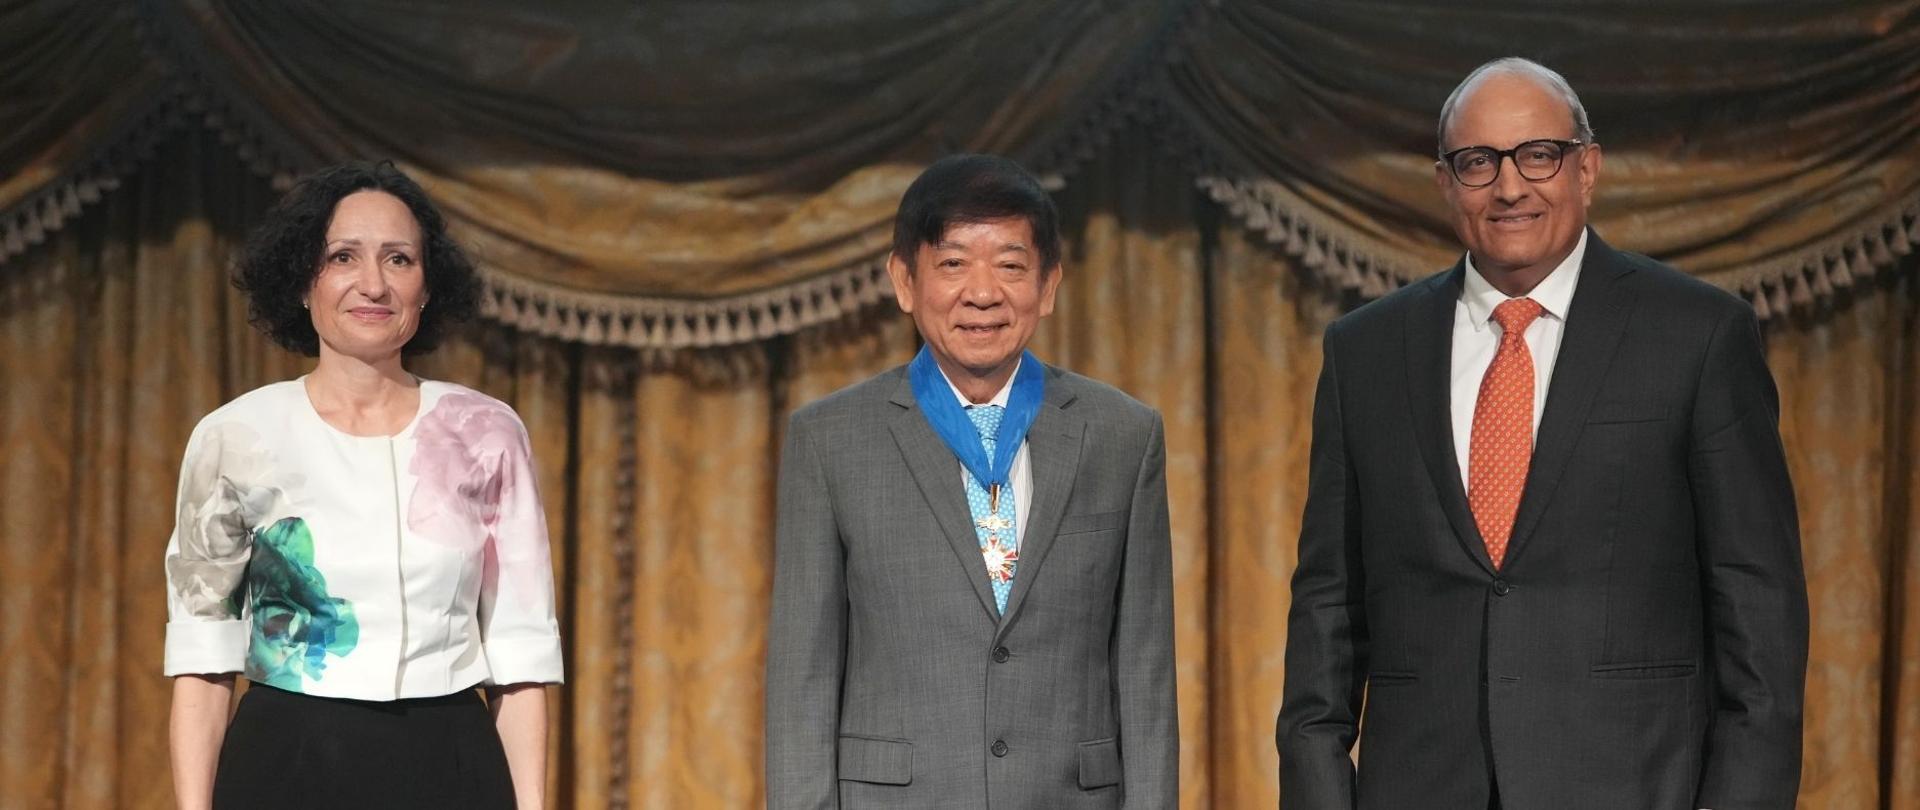 Mr_Khaw_Boon_Wan_awarded_with_Commander’s_Cross_with_star_of_the_Order_of_Merit_of_the_Republic_of_Poland. Fot: Lianhe Zaobao (Singapore Press Holdings)